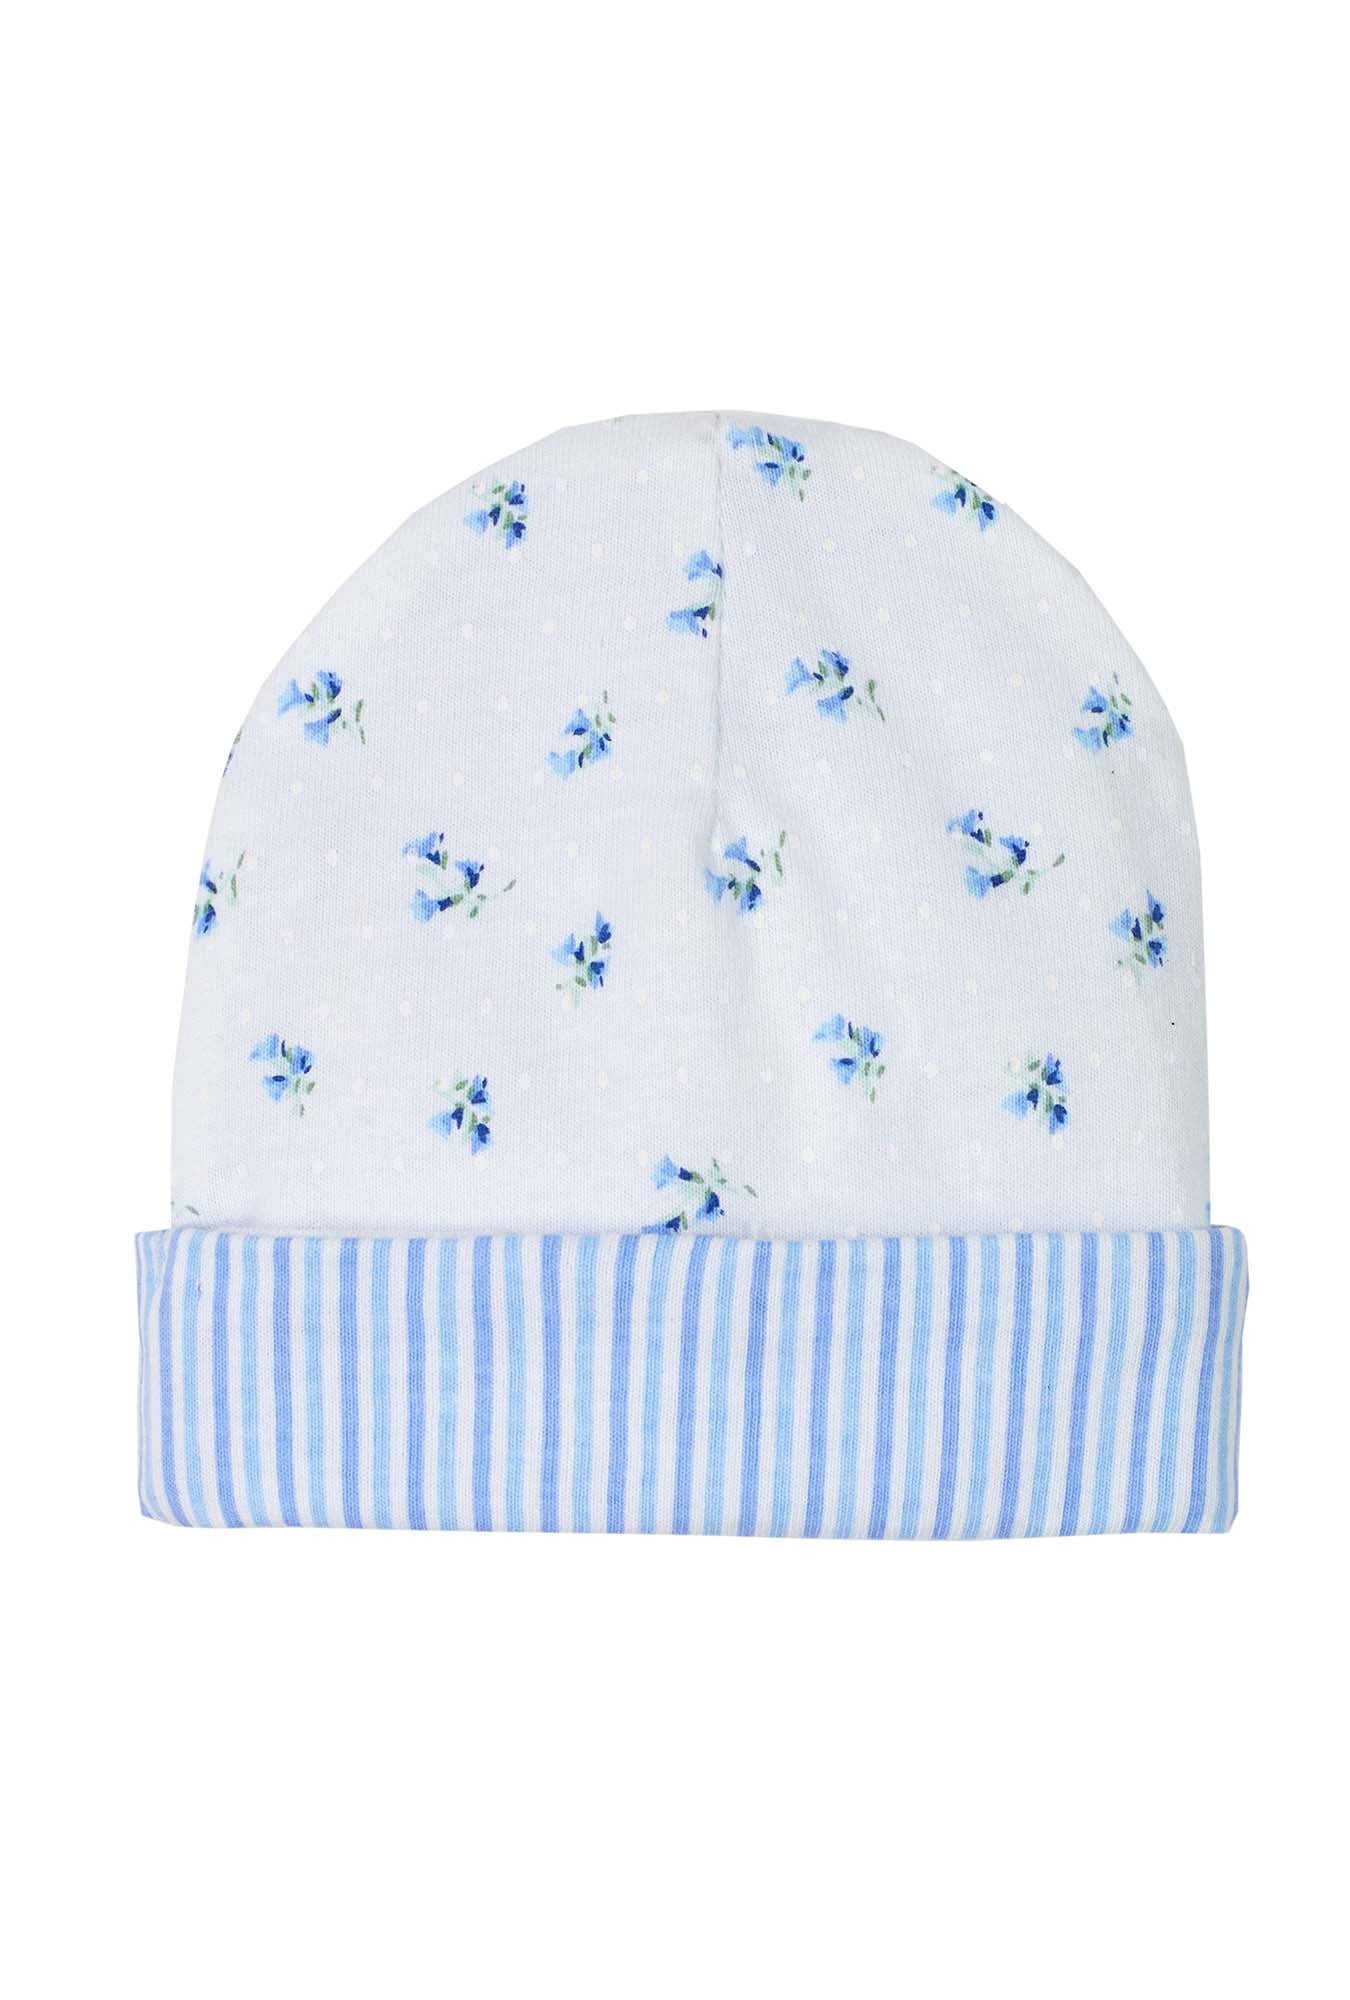 A Baby Seaside Floral Cotton Hat